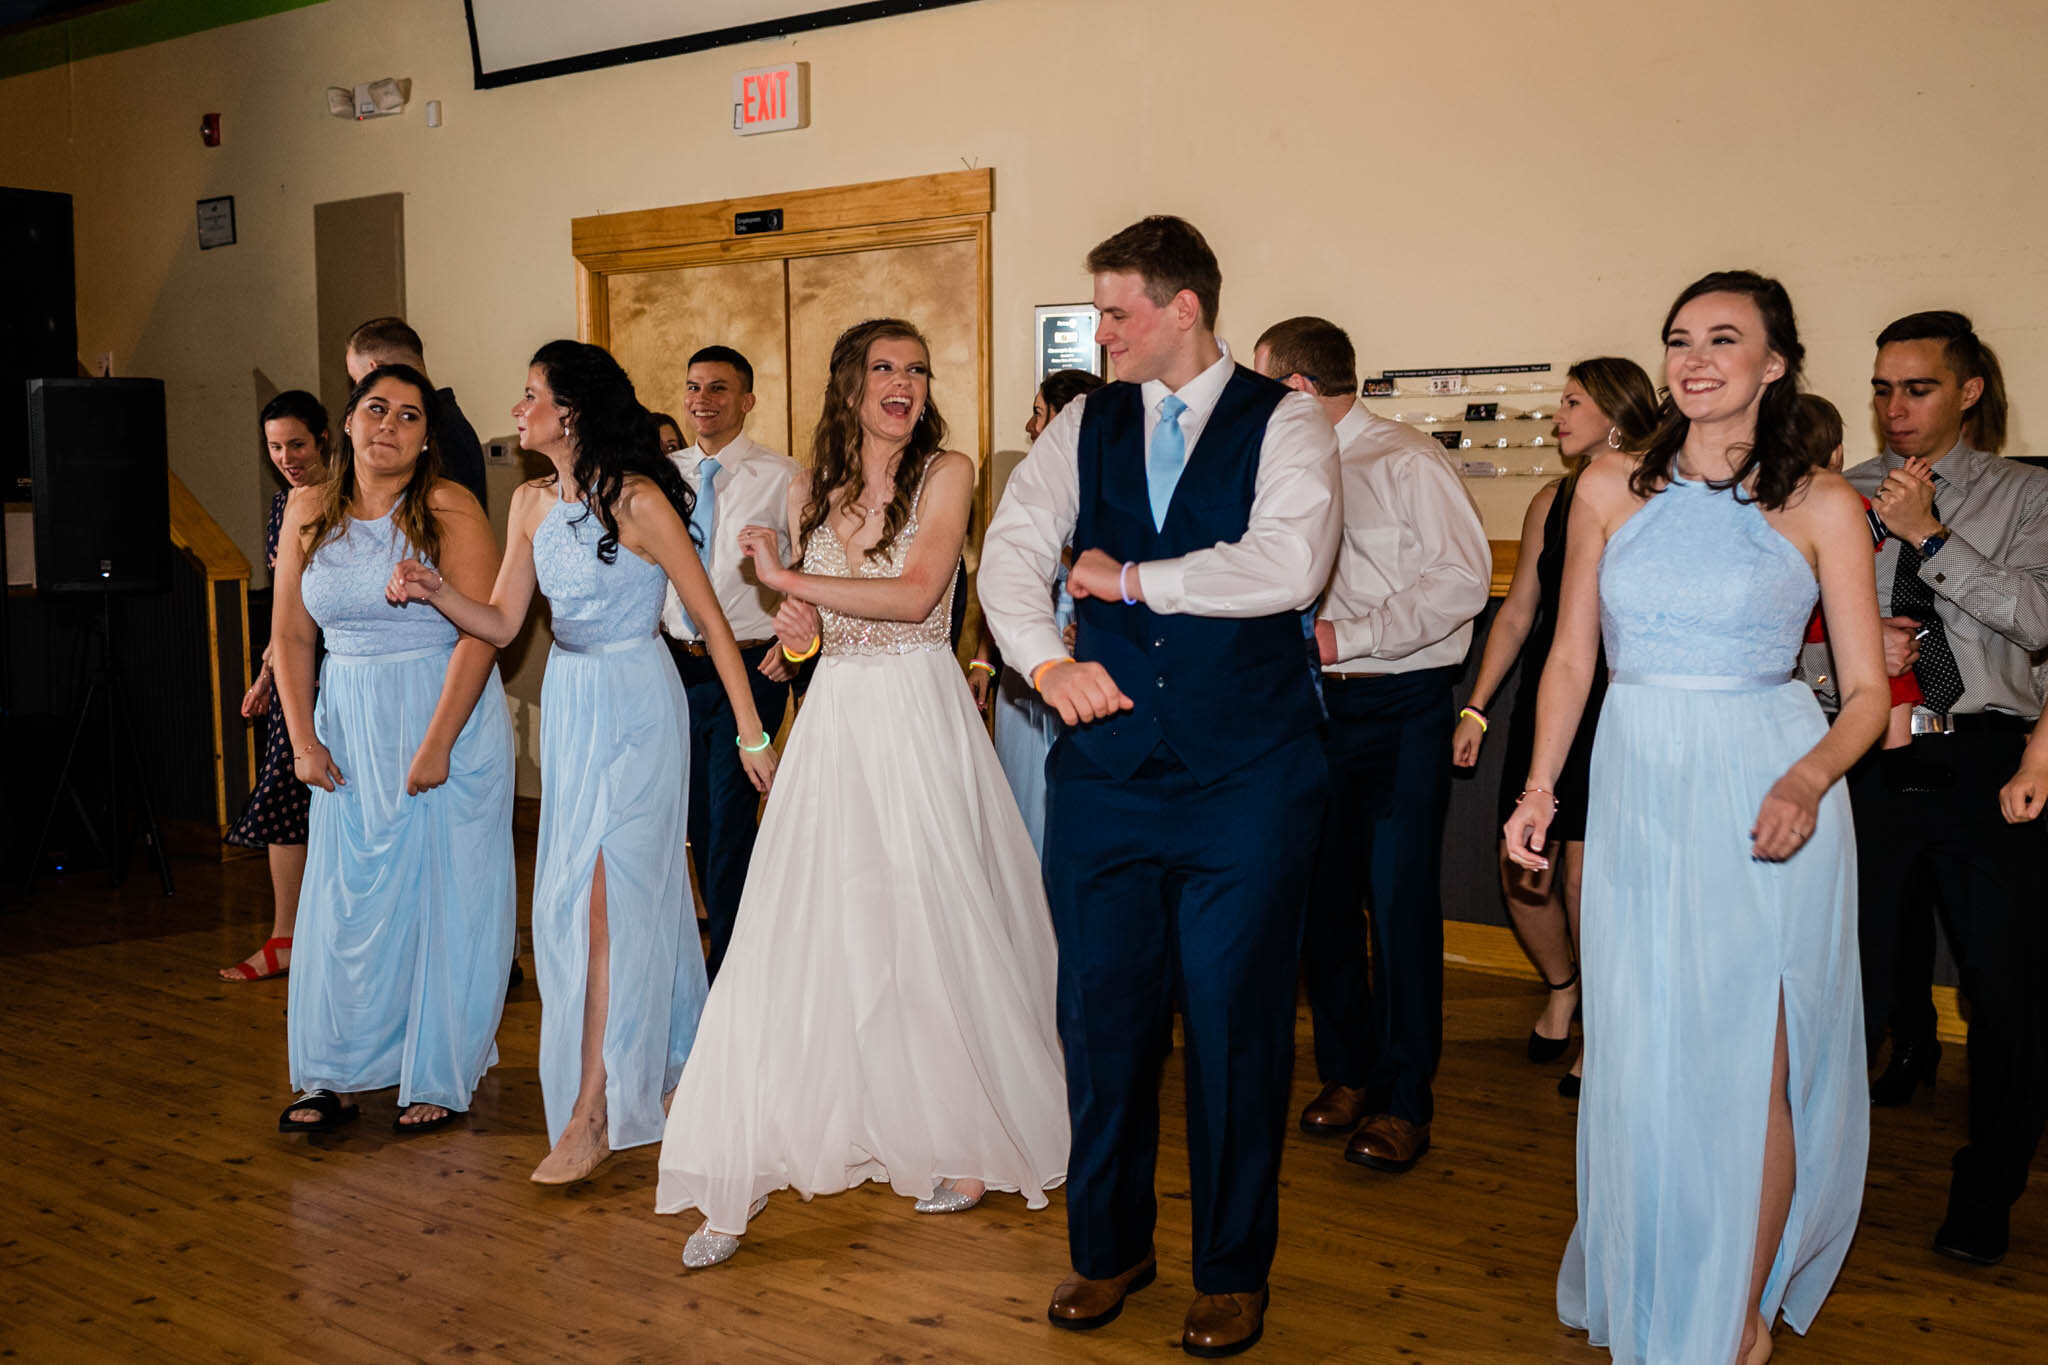 Durham Wedding Photographer | By G. Lin Photography | Guests and bride and groom dancing during reception